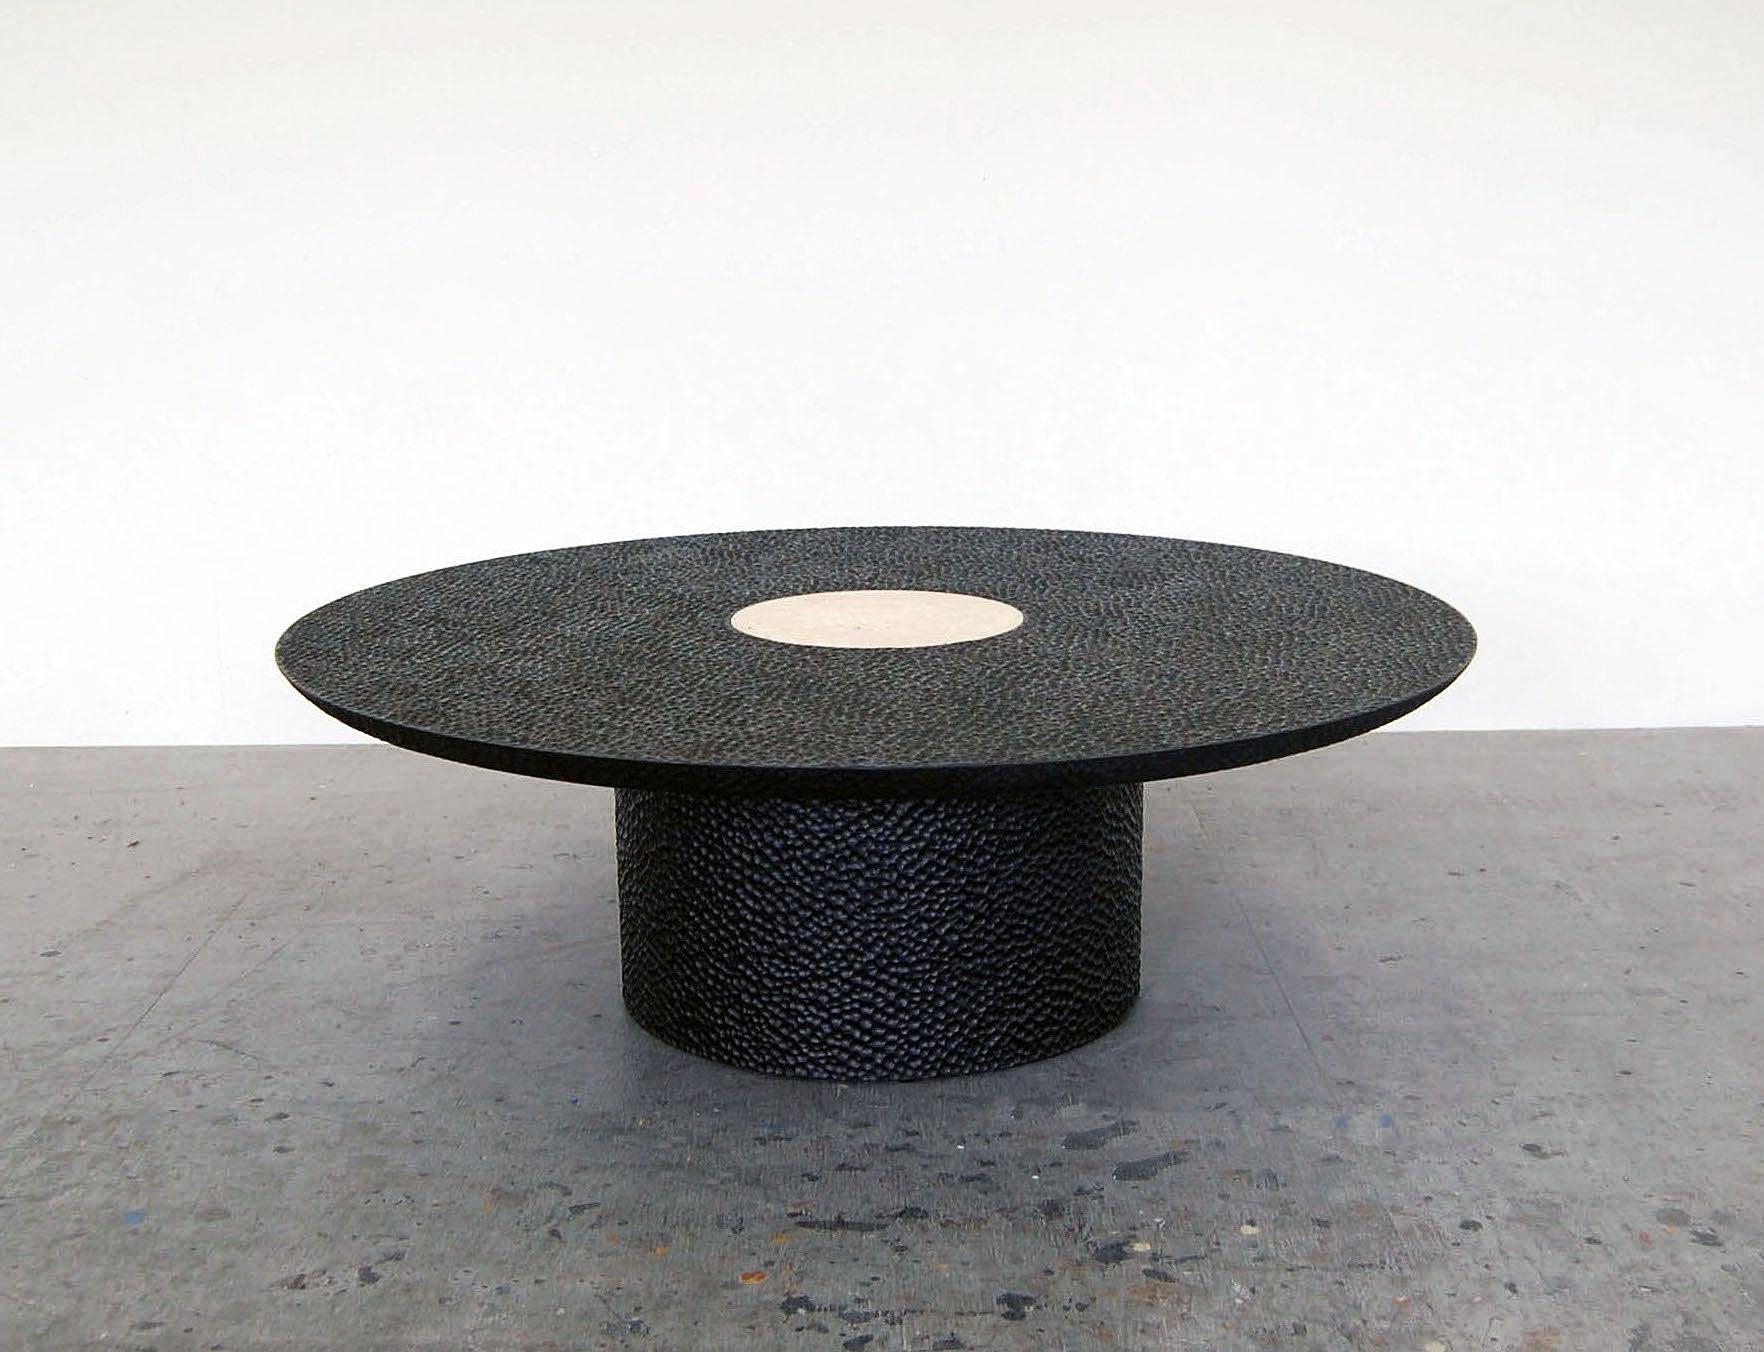 Luna coffee table sculpted by John Eric Byers.
Dimensions: 40.6 x diameter 122 cm.
Materials: carved blackened maple, travertine.

All works are individually handmade to order.

John Eric Byers creates geometrically inspired pieces that are